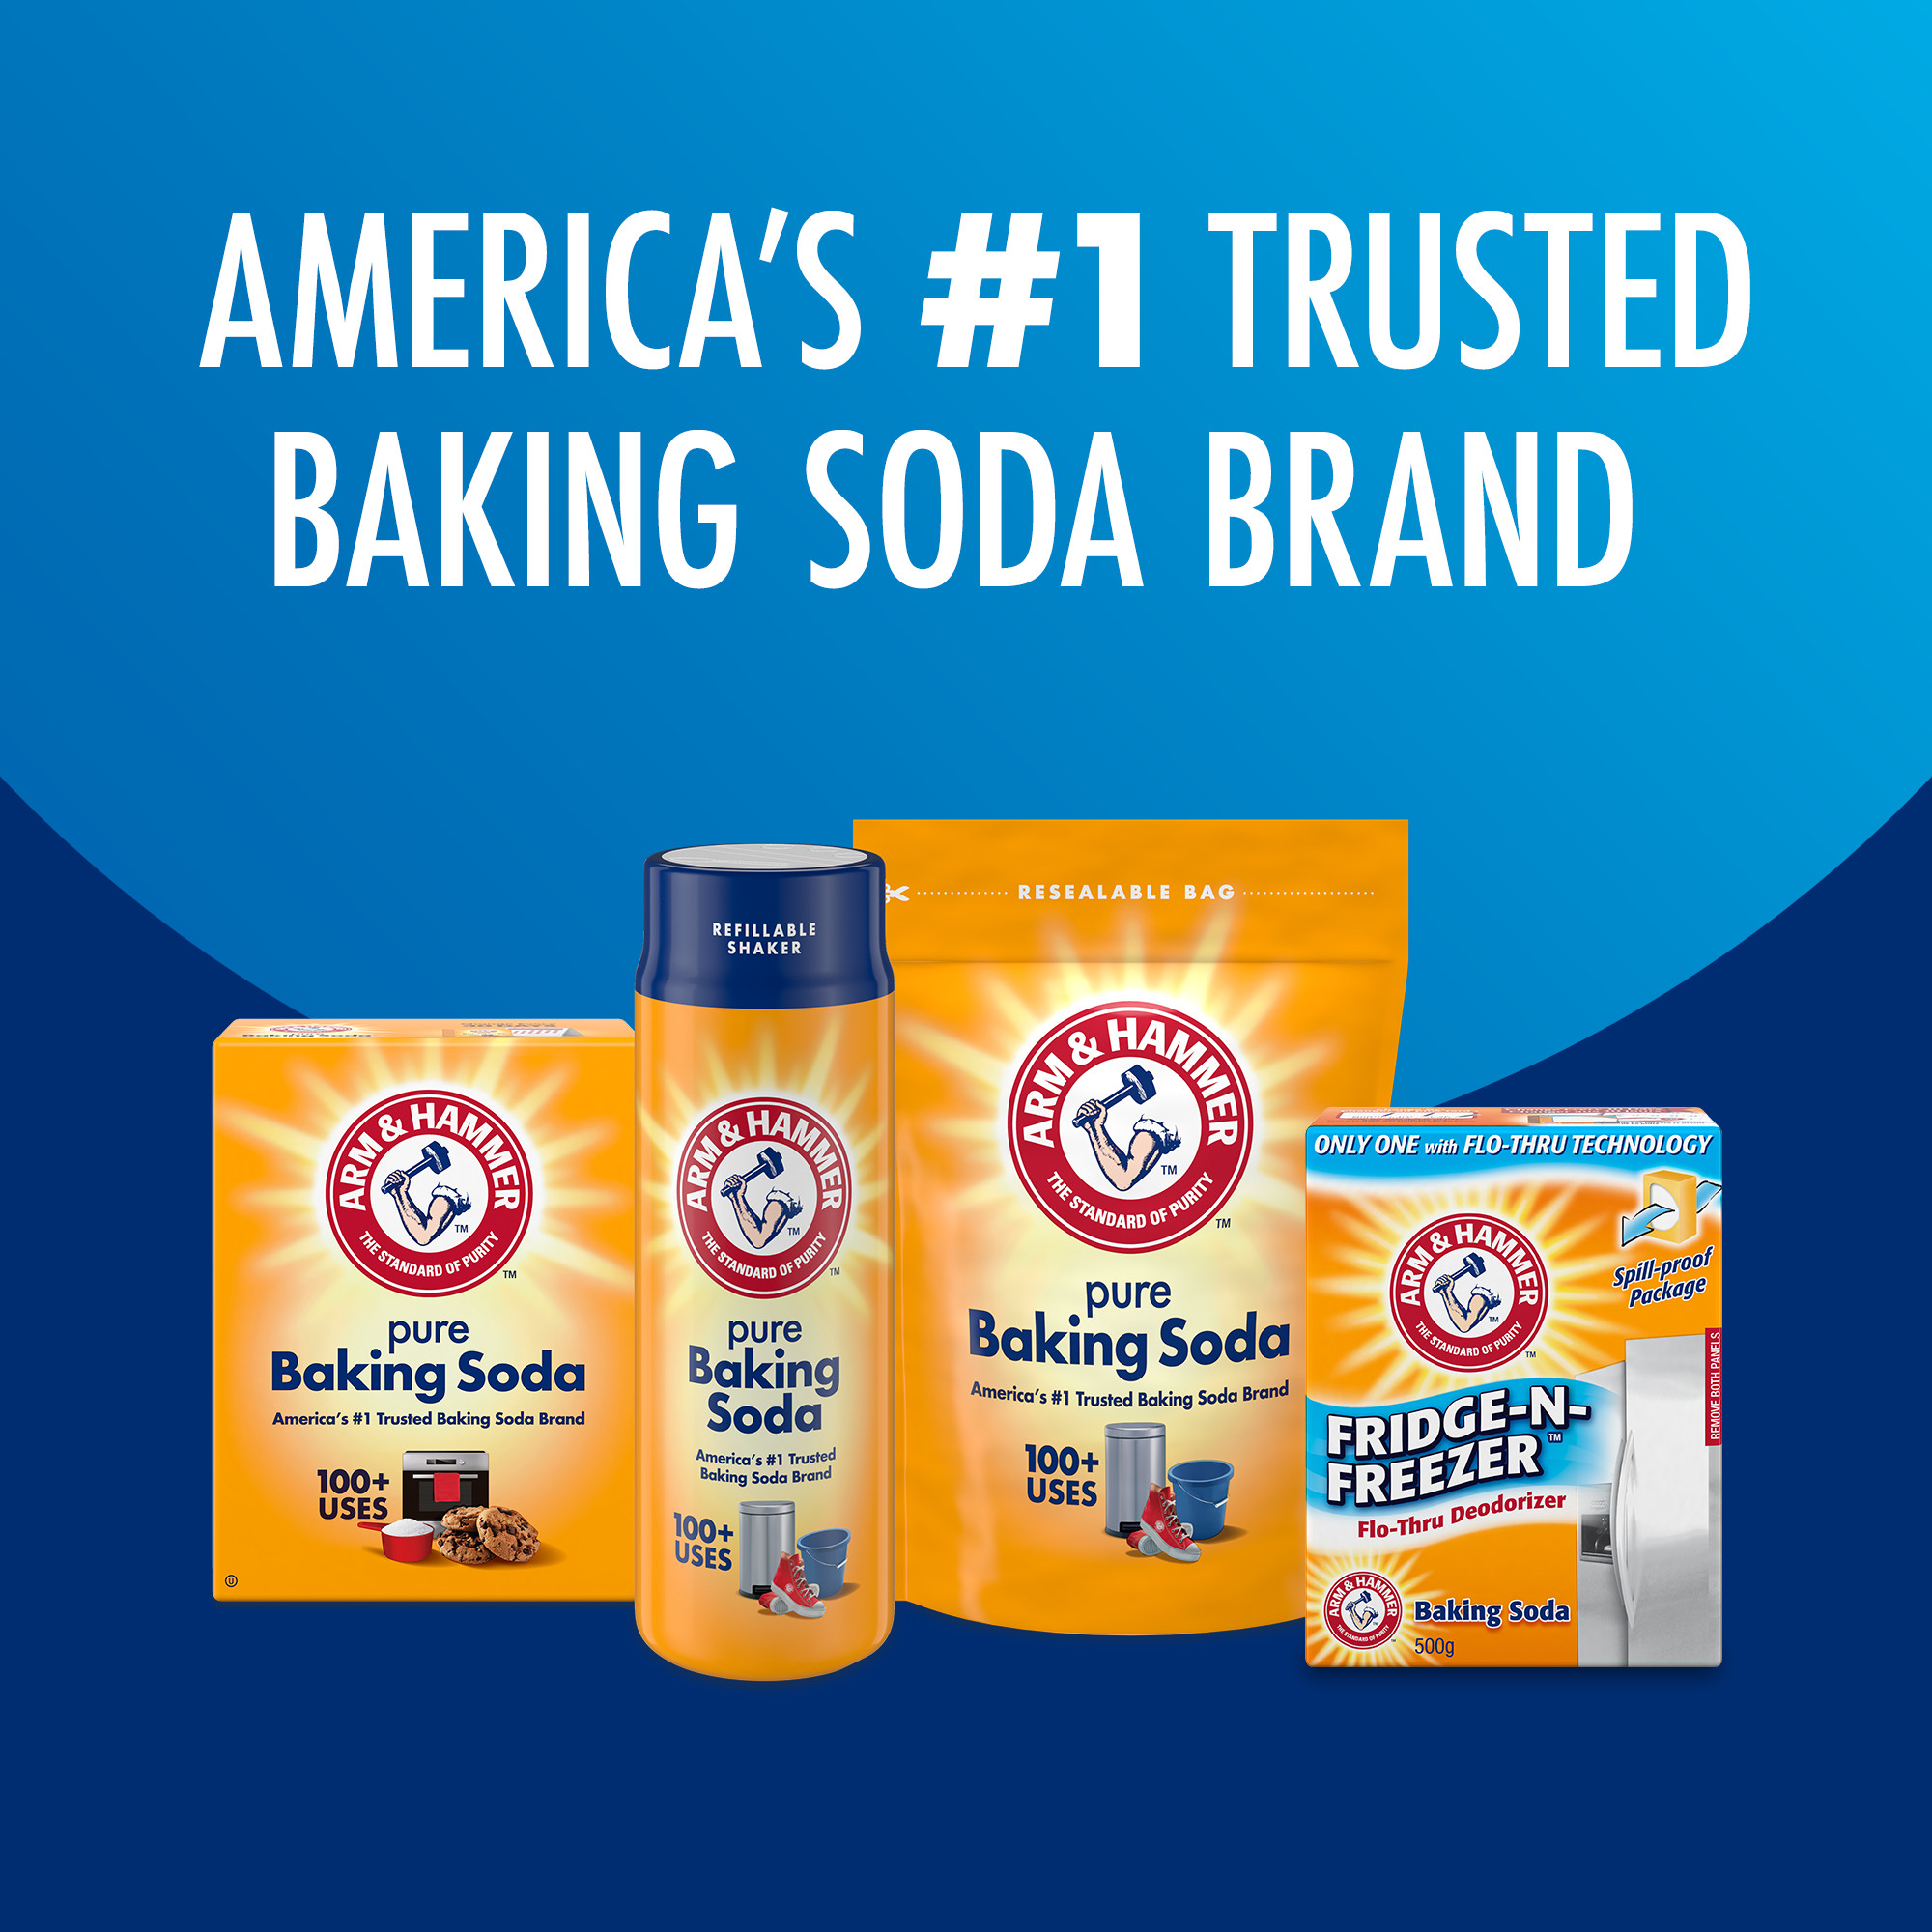 ARM & HAMMER Pure Baking Soda, For Baking, Cleaning & Deodorizing, 5 lb Bag - image 5 of 15